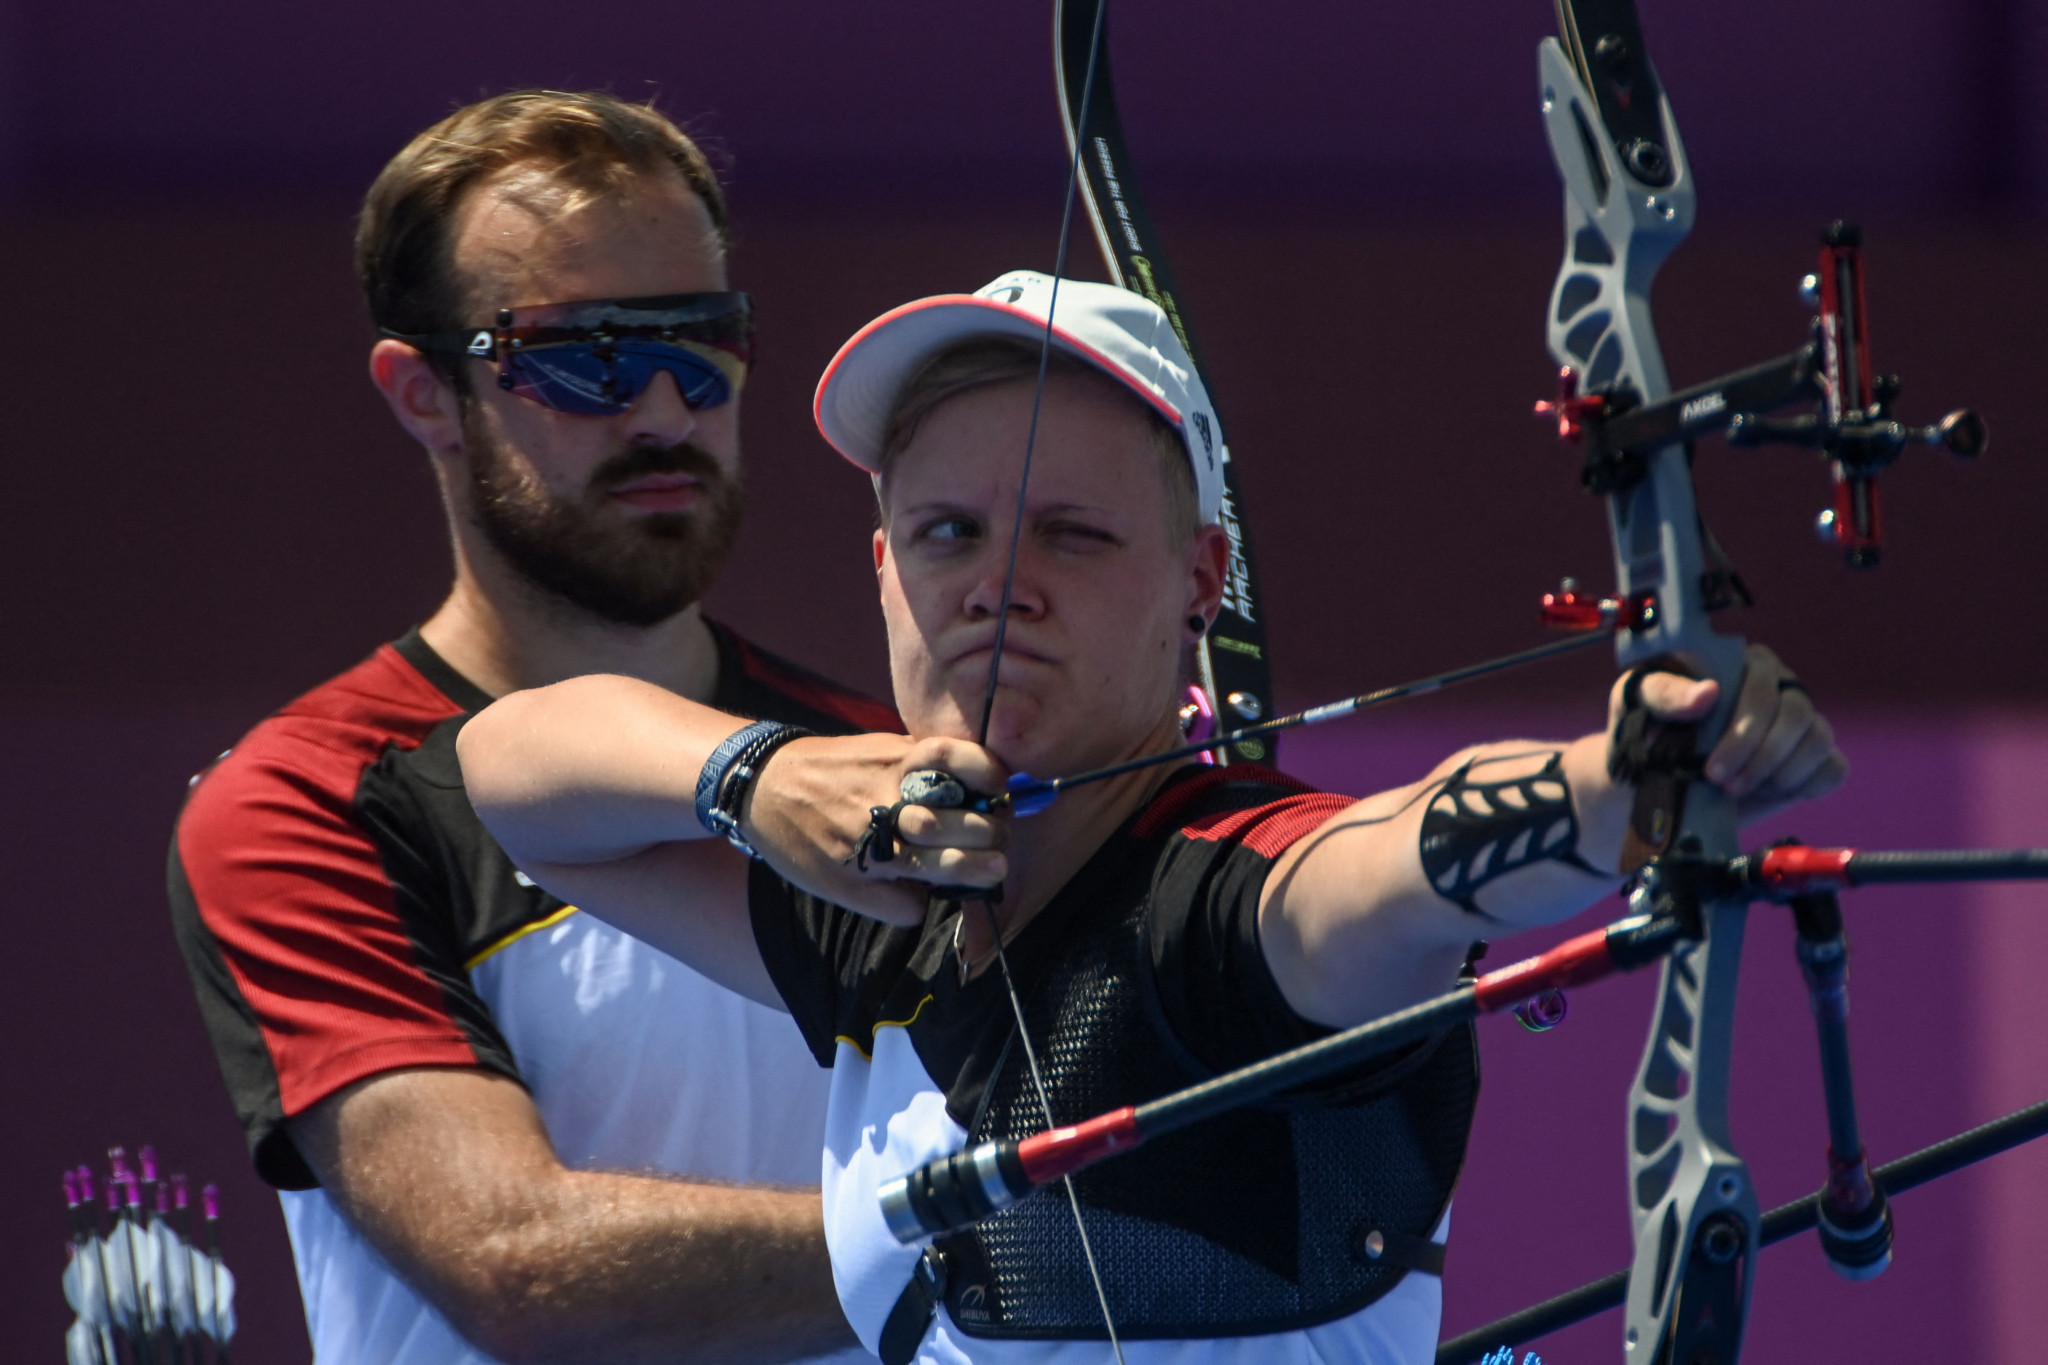 Michelle Kroppen and Florian Unruh are into the mixed recurve final ©Getty Images